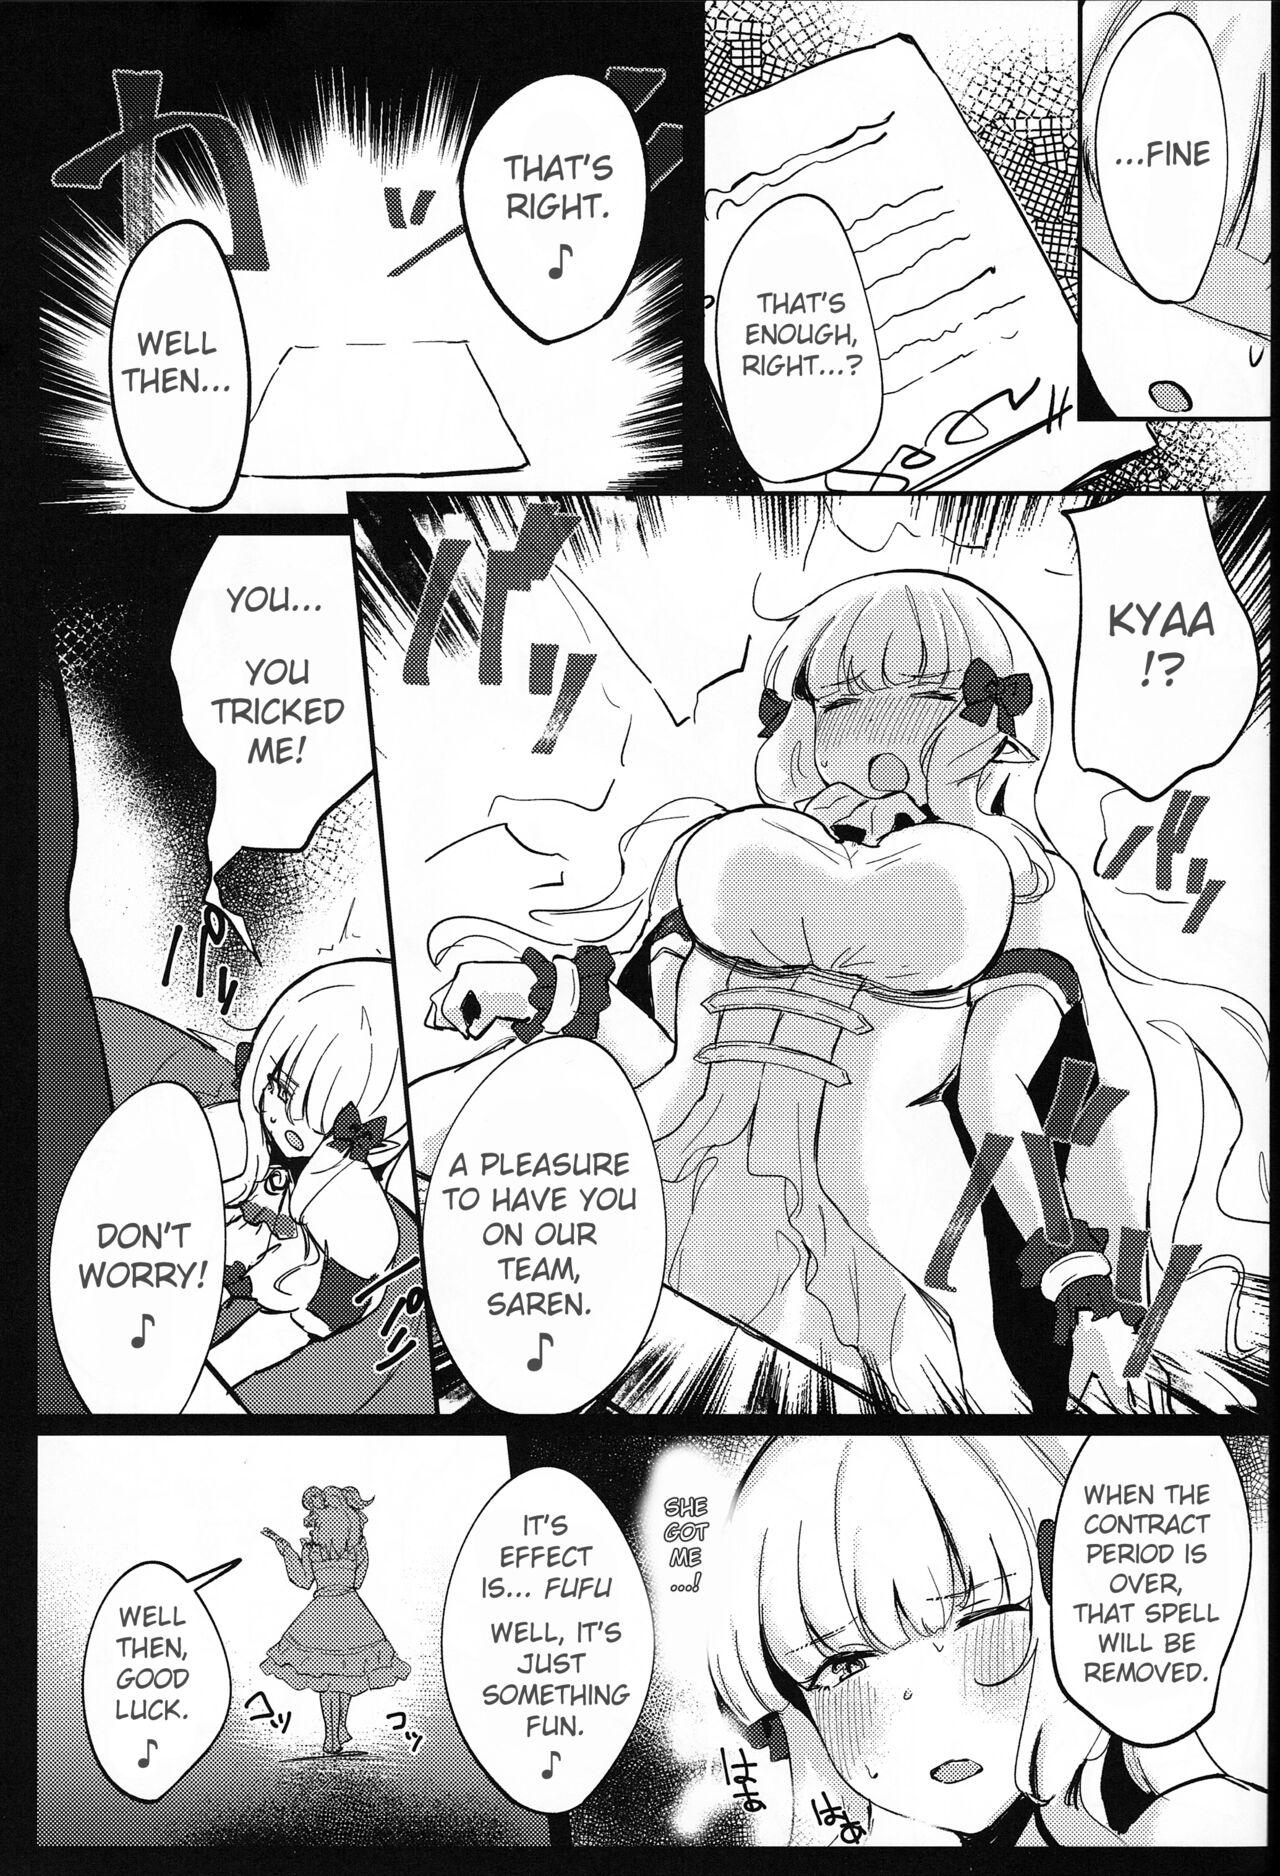 Shaven Umi no Ie Extreme! - Princess connect Husband - Page 6